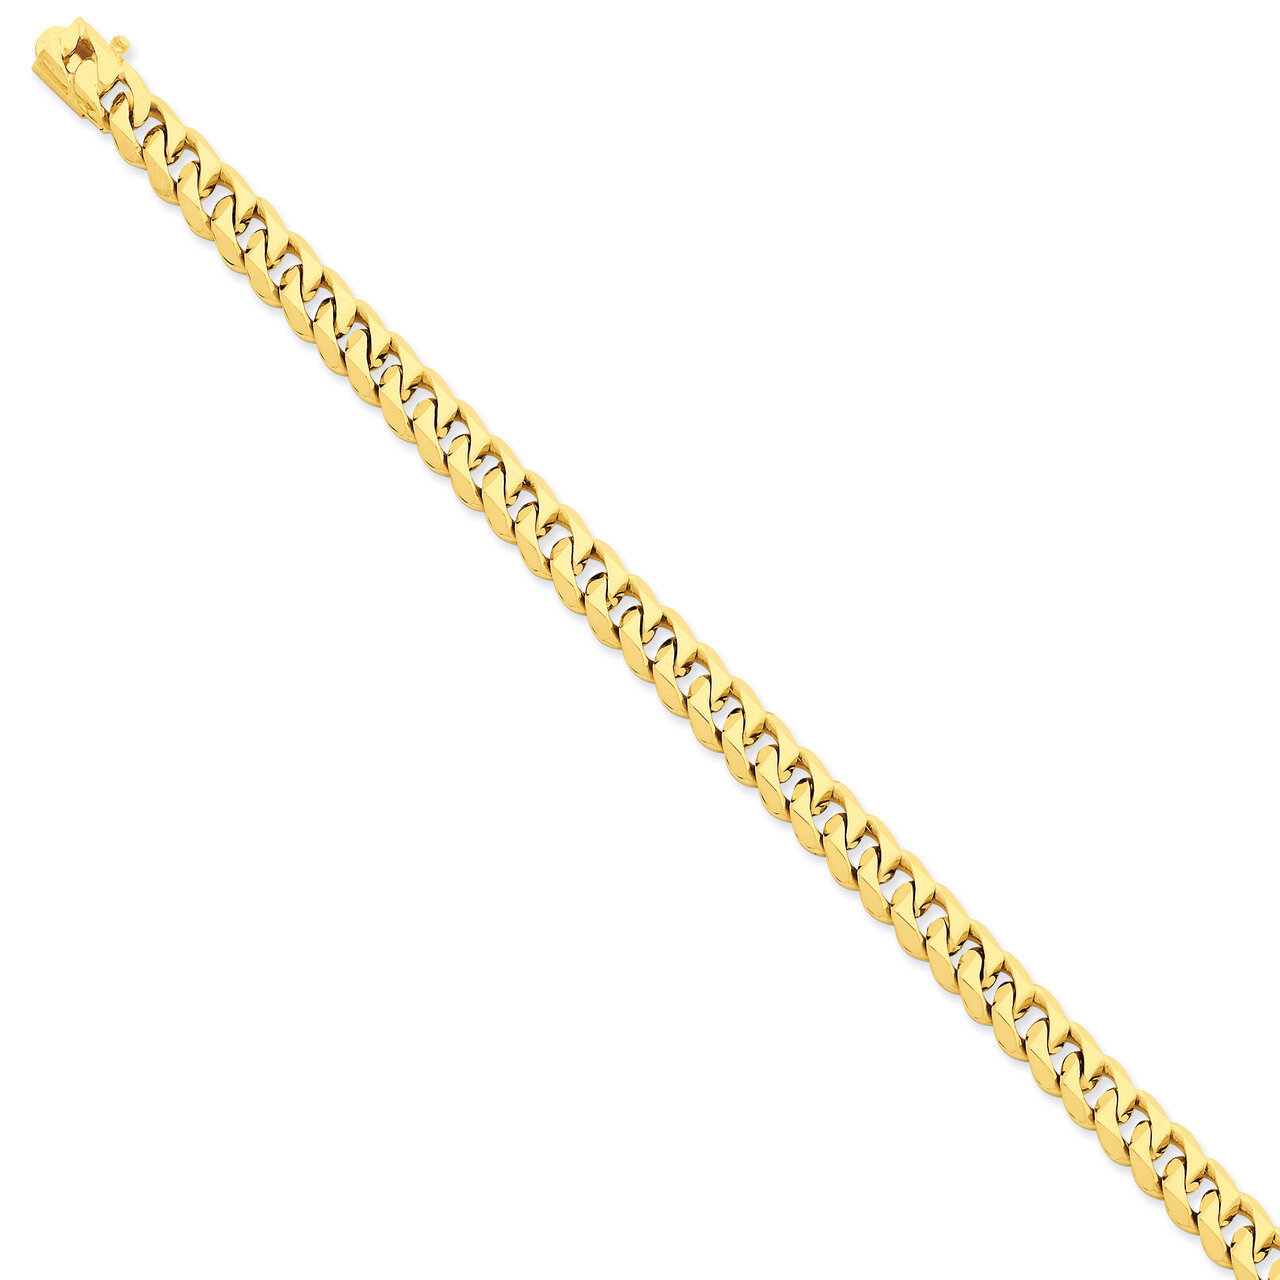 7mm Hand-Polished Traditional Link Chain 22 Inch 14k Gold LK117-22